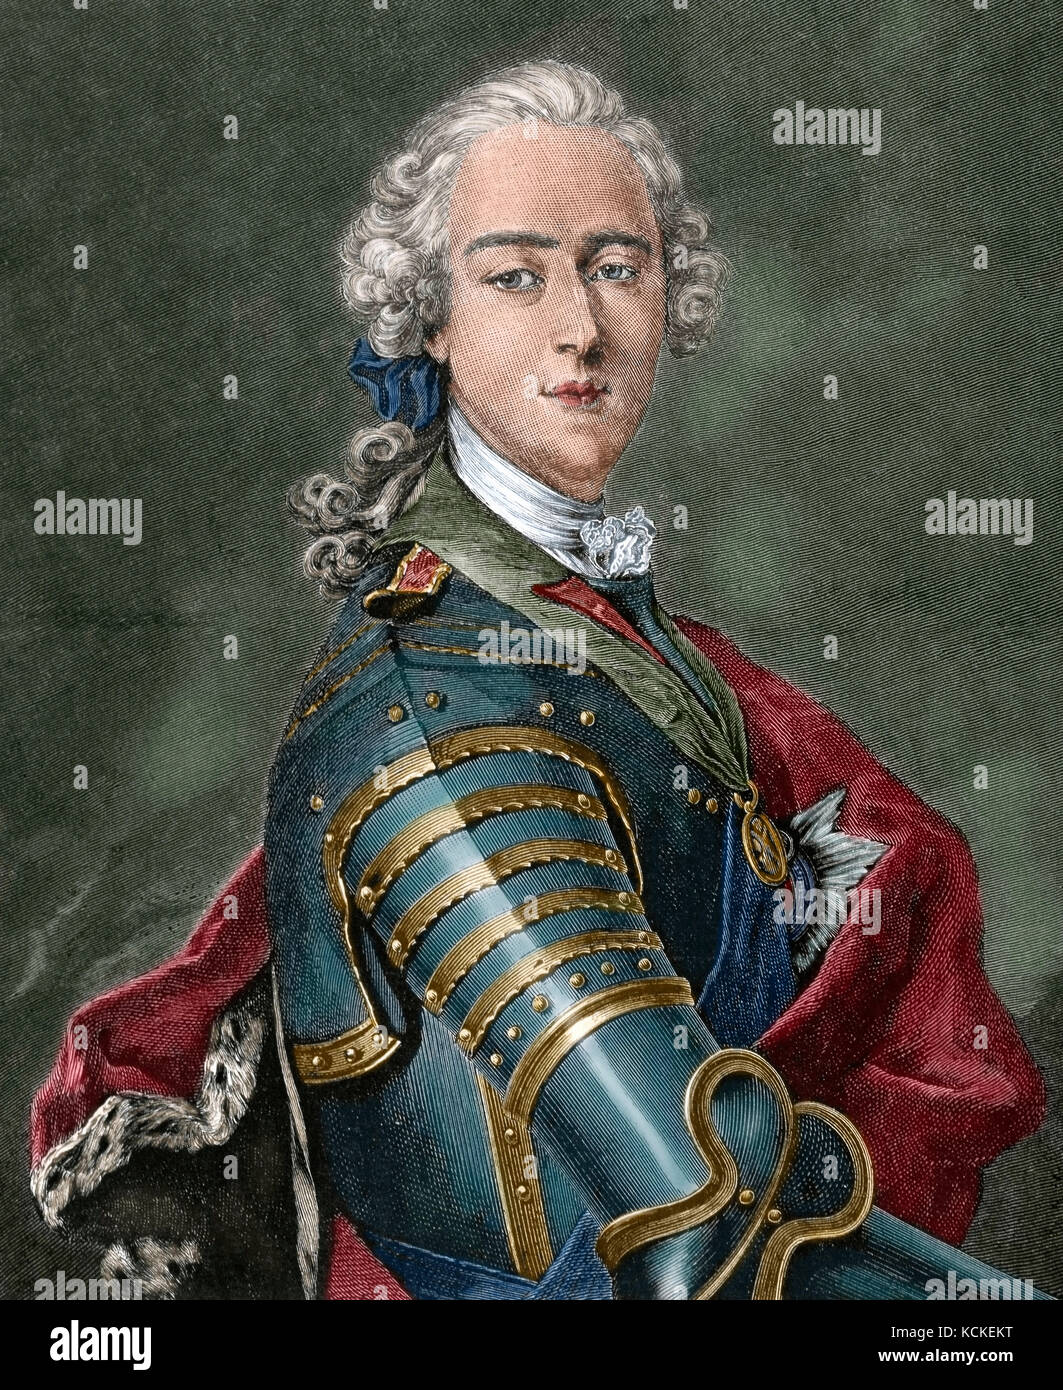 Charles Edward Stuart (1720-1788), known as The Young Pretender and The Young Chevalier. Second Jacobite pretender to the thrones of England, Scotland, France and Ireland, as Charles III, from the death of his father in 1766. Portrait. Engraving by R. Taylor. Colored. Stock Photo